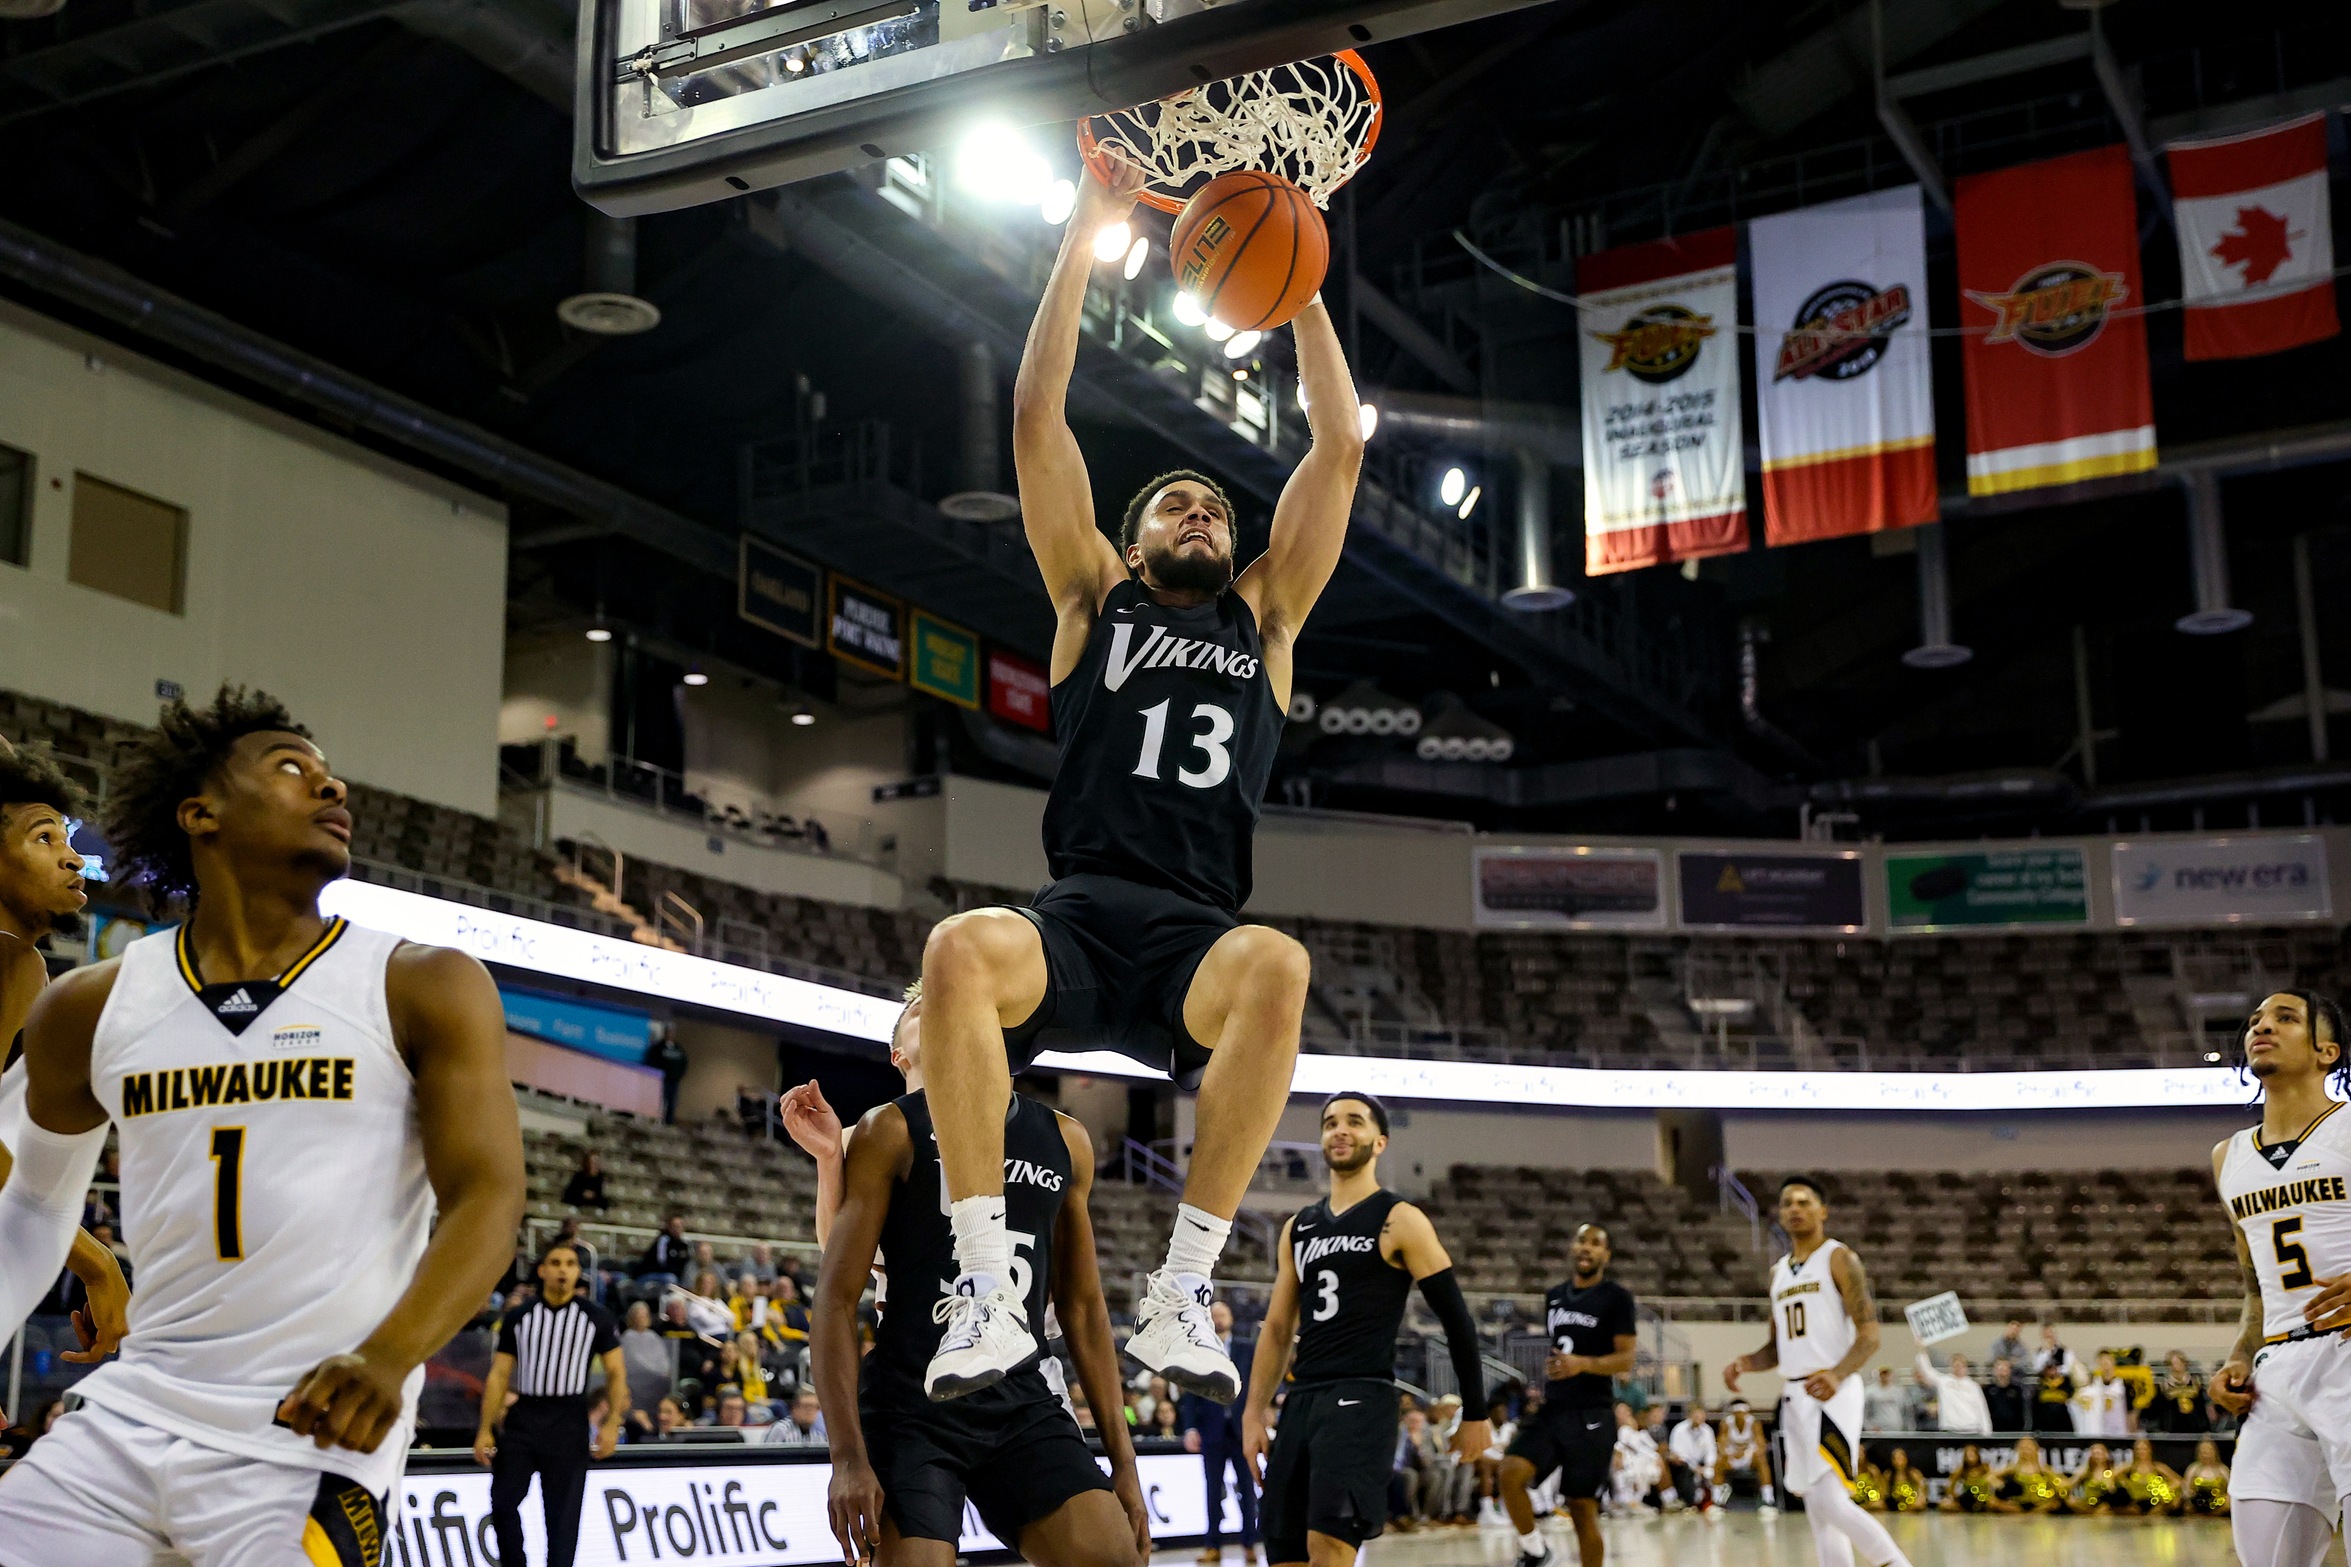 Cleveland State Men’s Basketball Advances to #HLMBB Championship Game With Win over Milwaukee